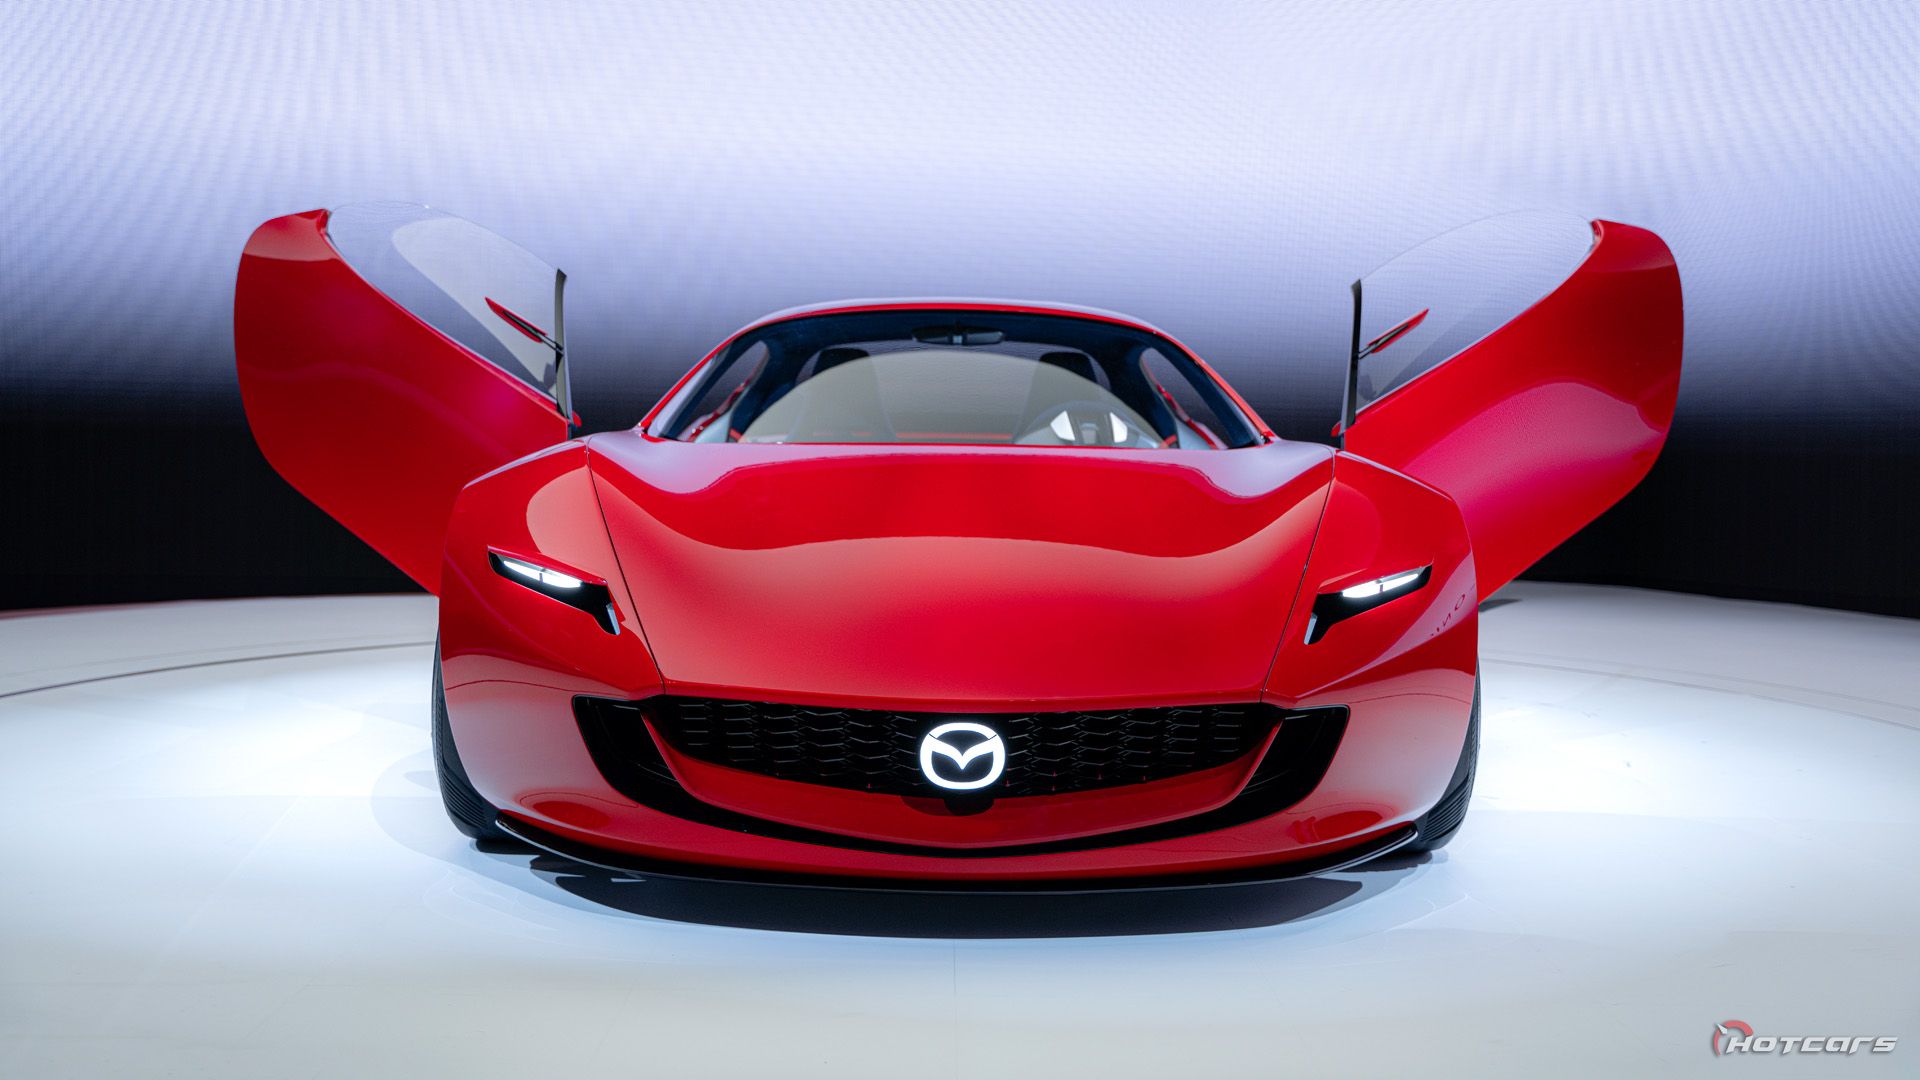 2025 Mazda MX-5 imagined with Iconic SP concept lines